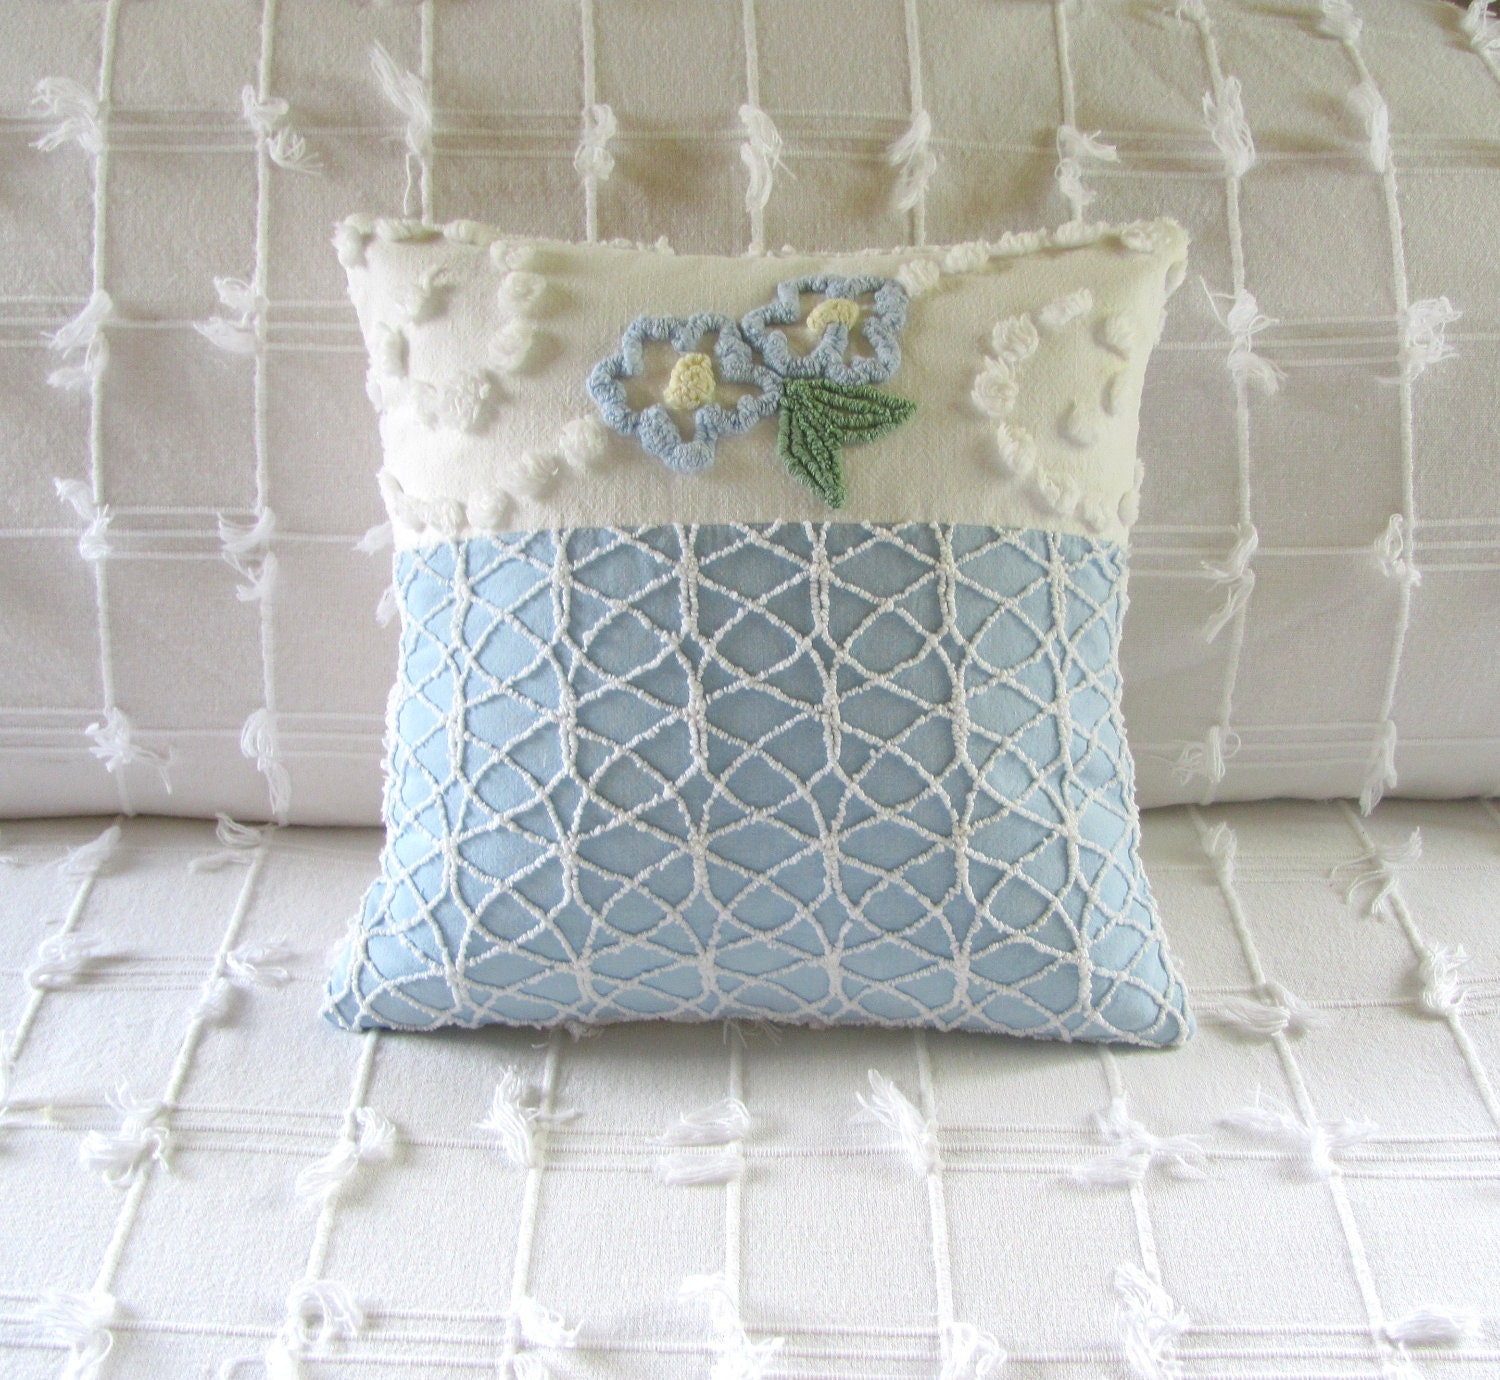 FORGET ME NOT handmade vintage chenille pillow cover 14 X 14 floral cushion cover